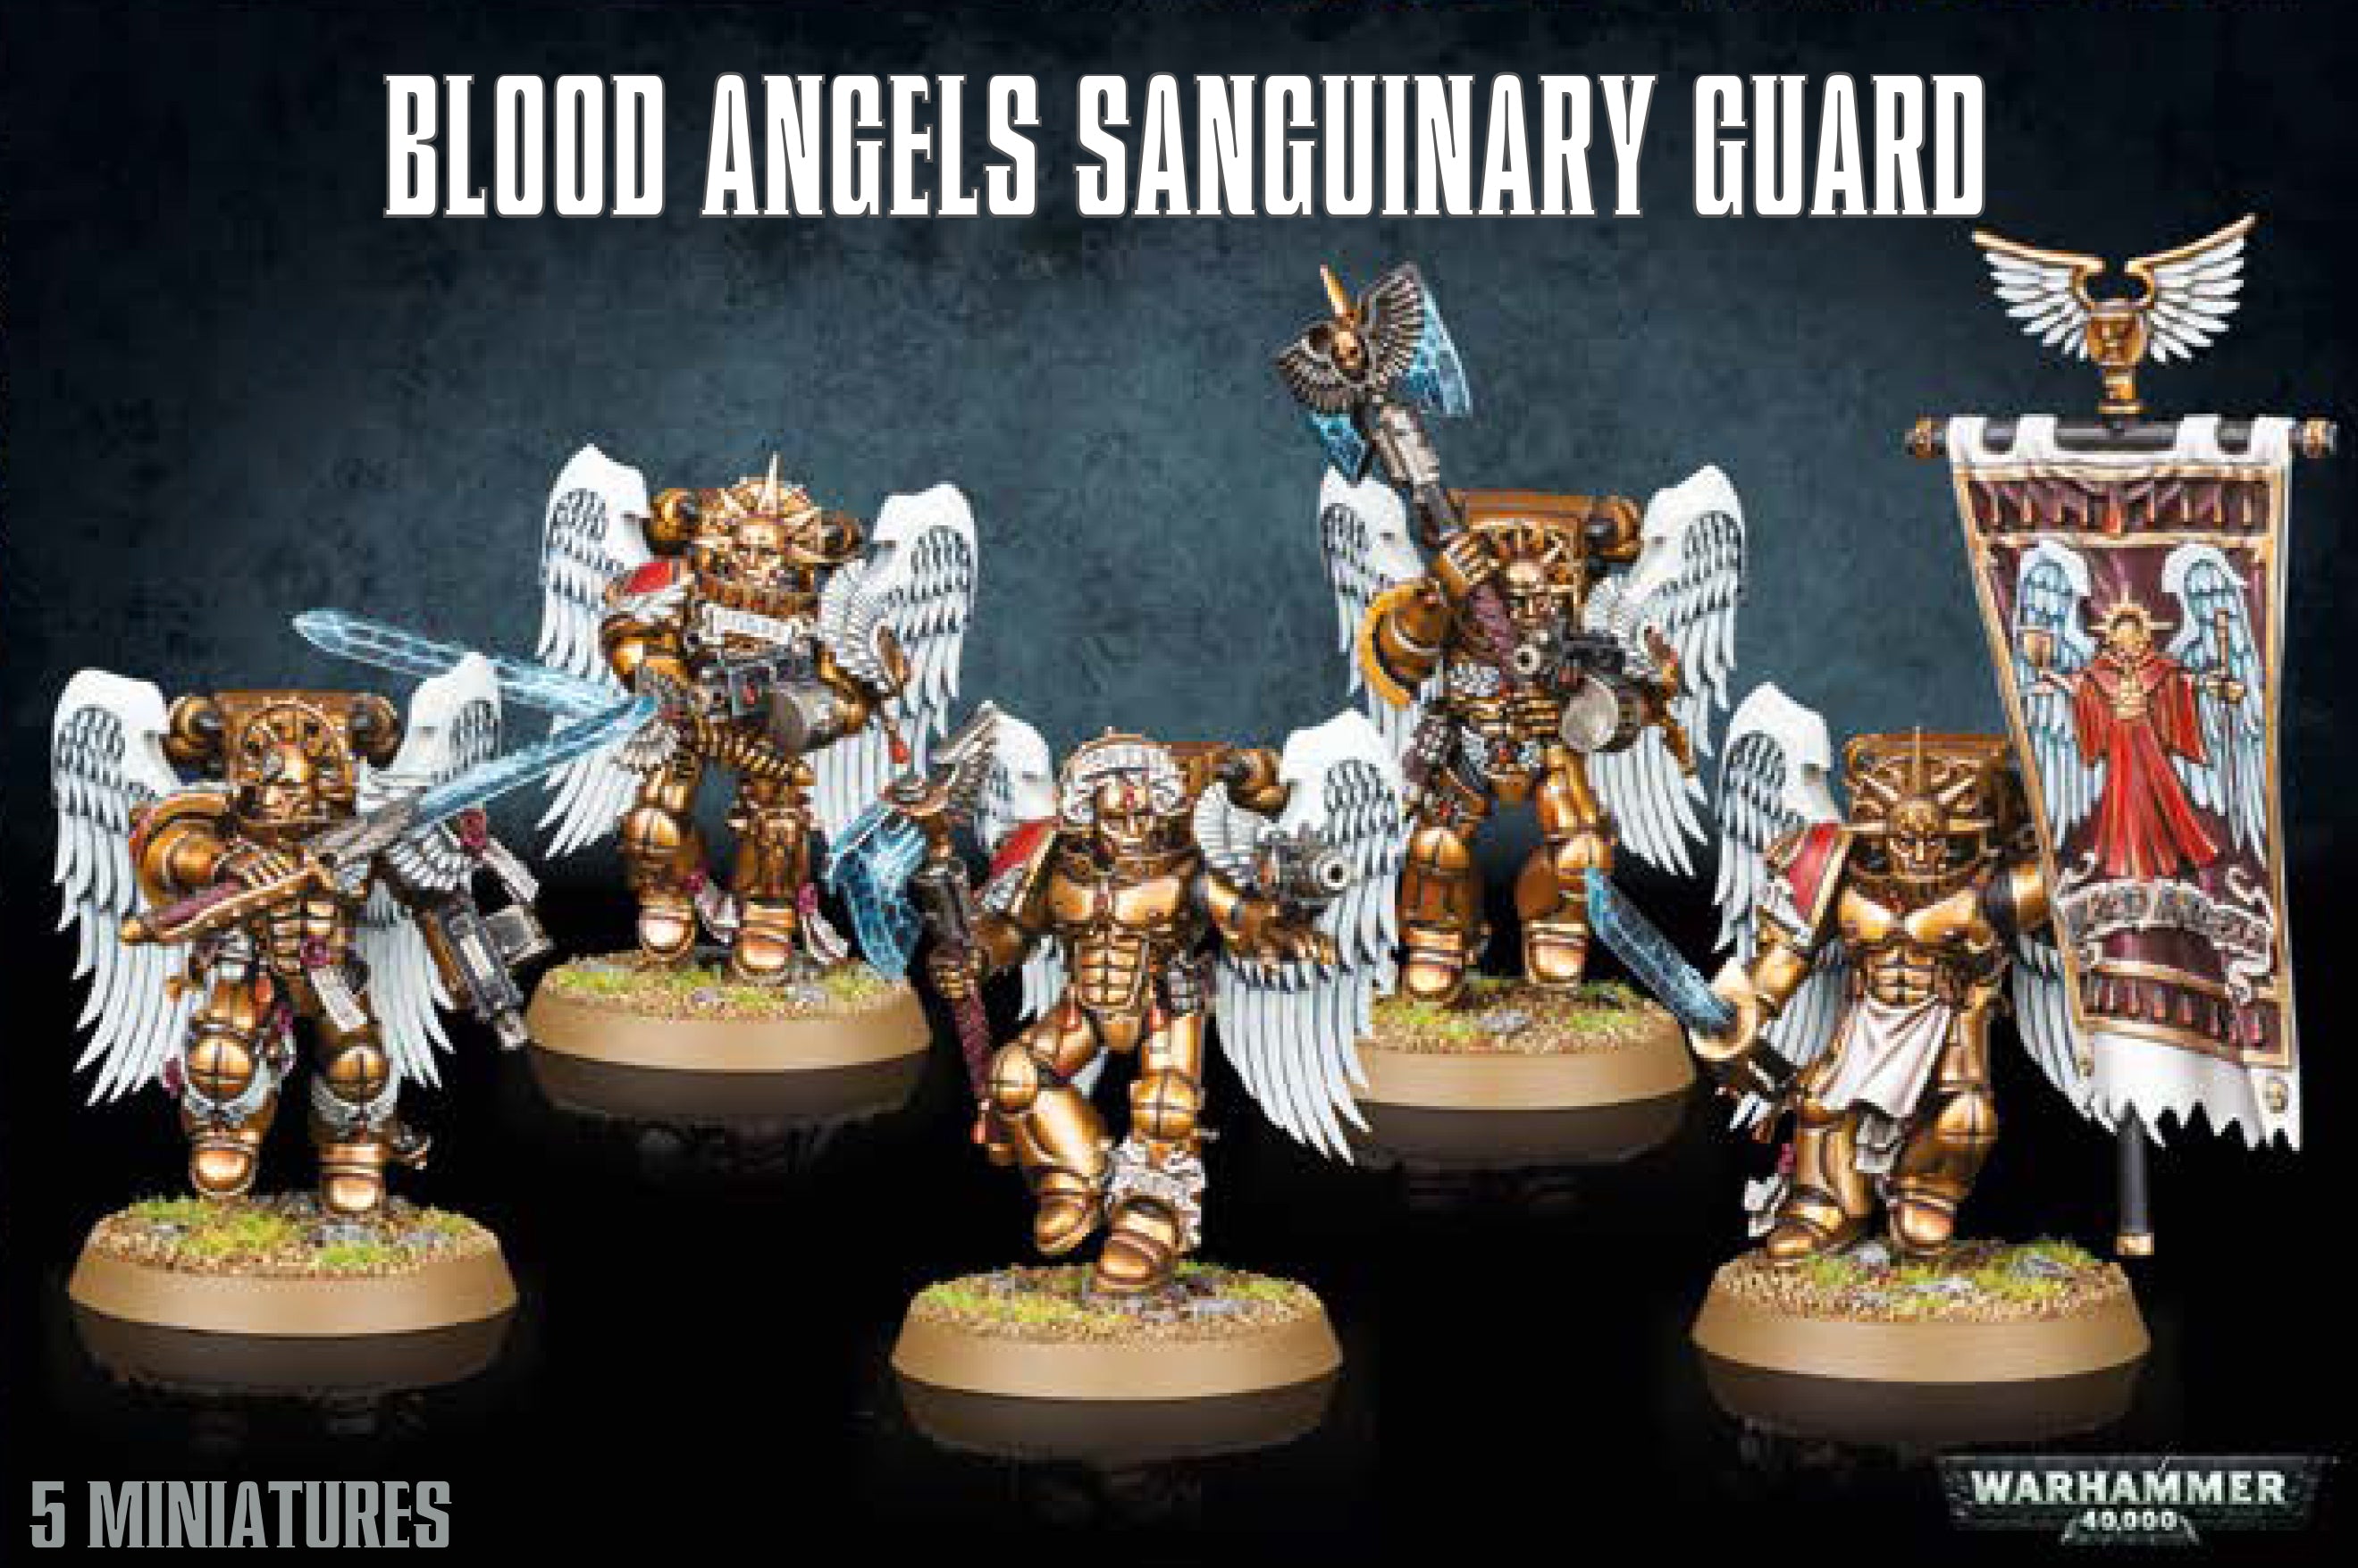 BLOOD ANGELS SANGUINARY GUARD Blood Angels Games Workshop    | Red Claw Gaming